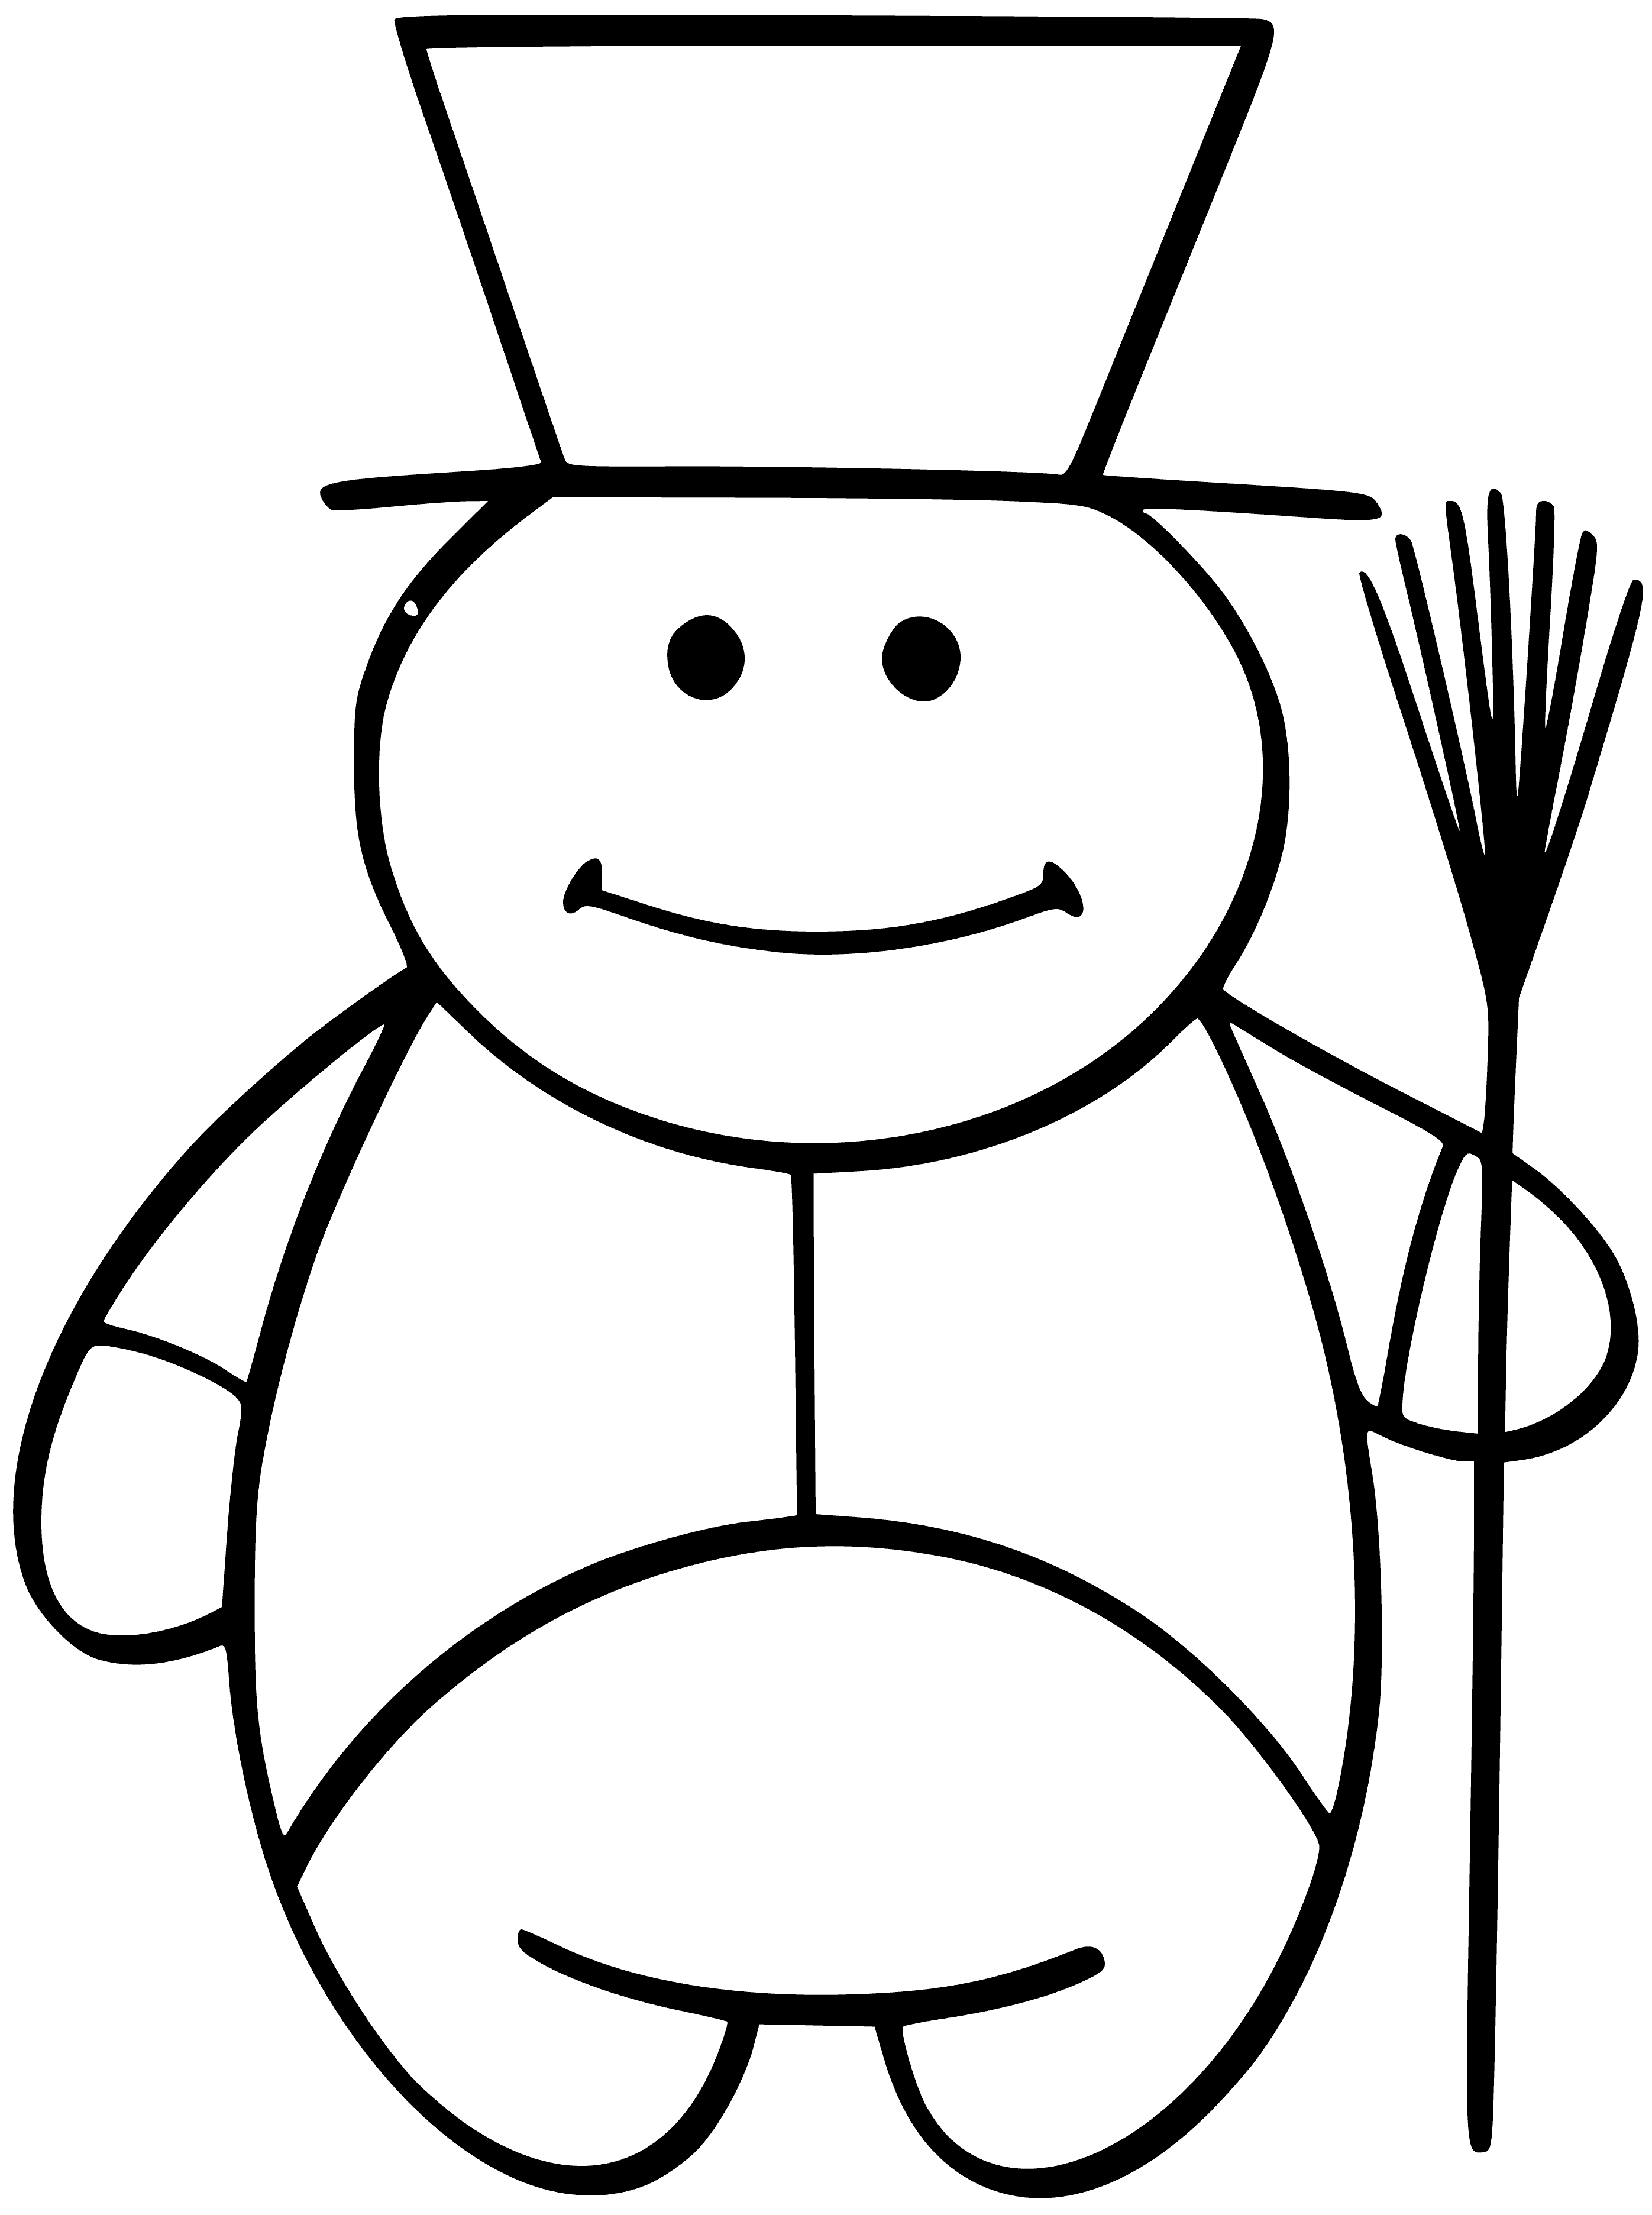 Chimney sweep or janitor coloring page